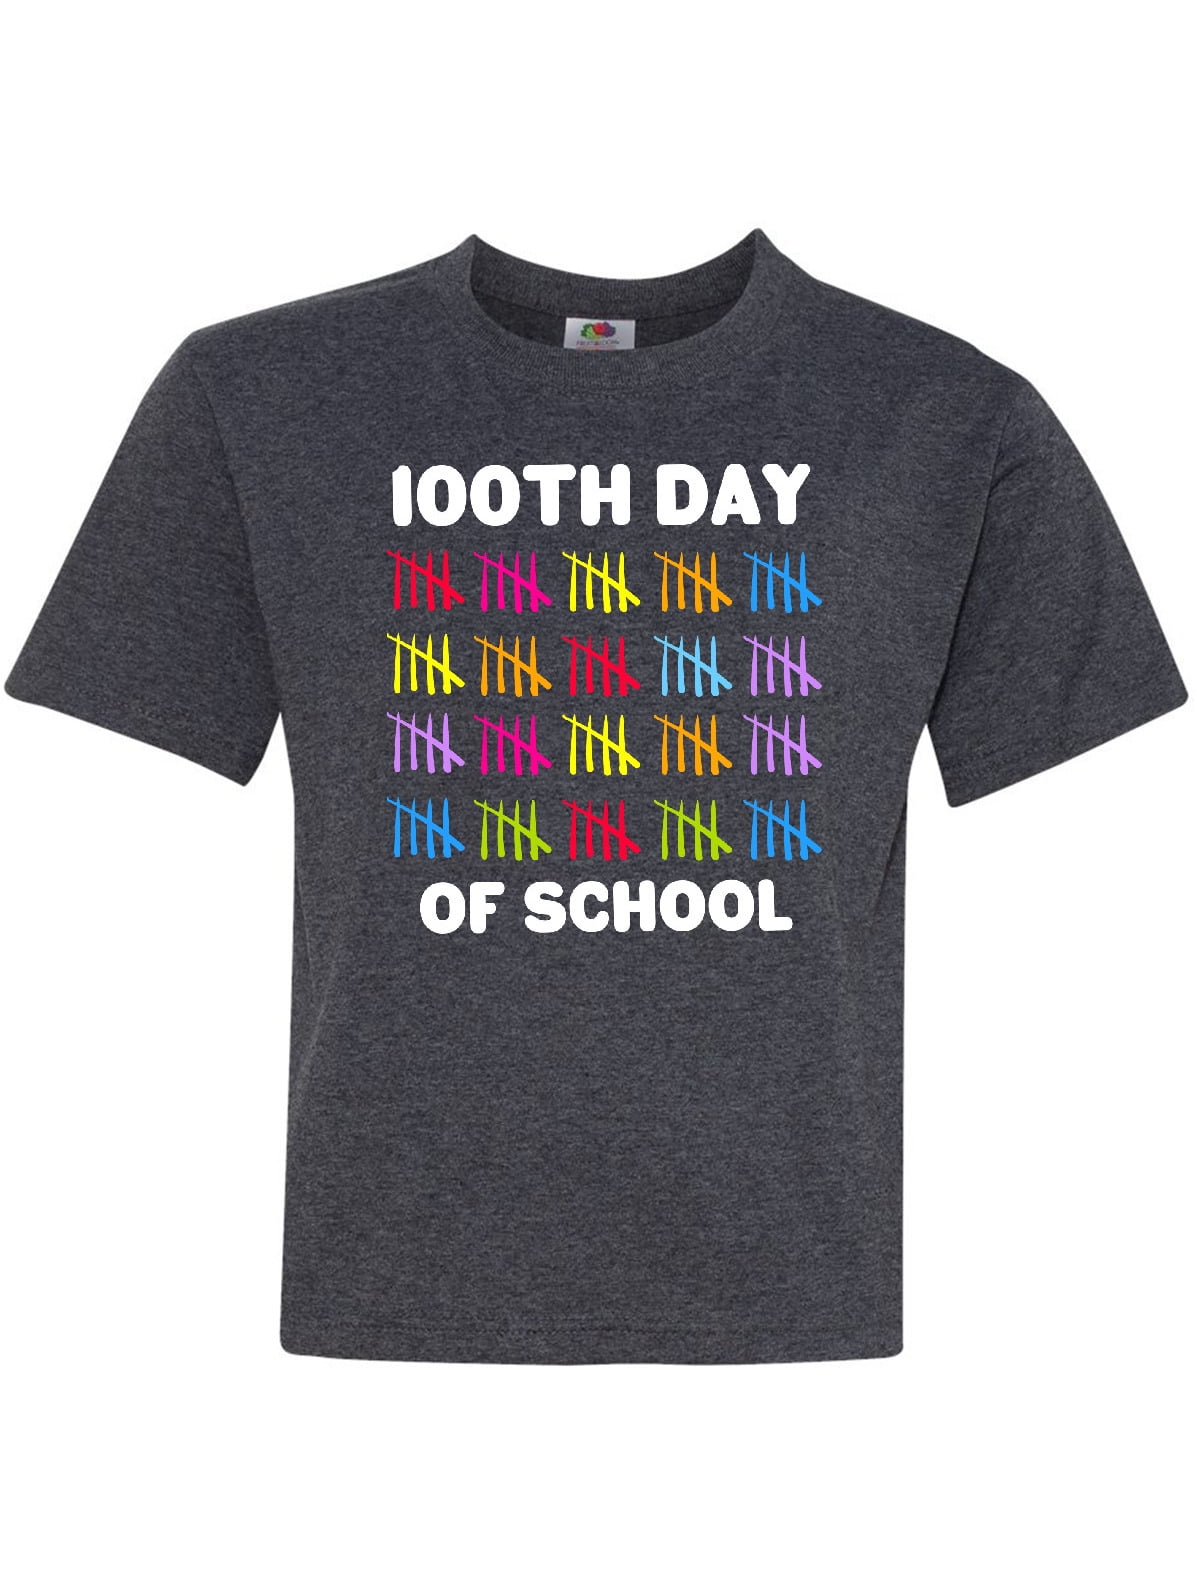 100th Day of School with Tally Marks Youth T-Shirt - Walmart.com ...